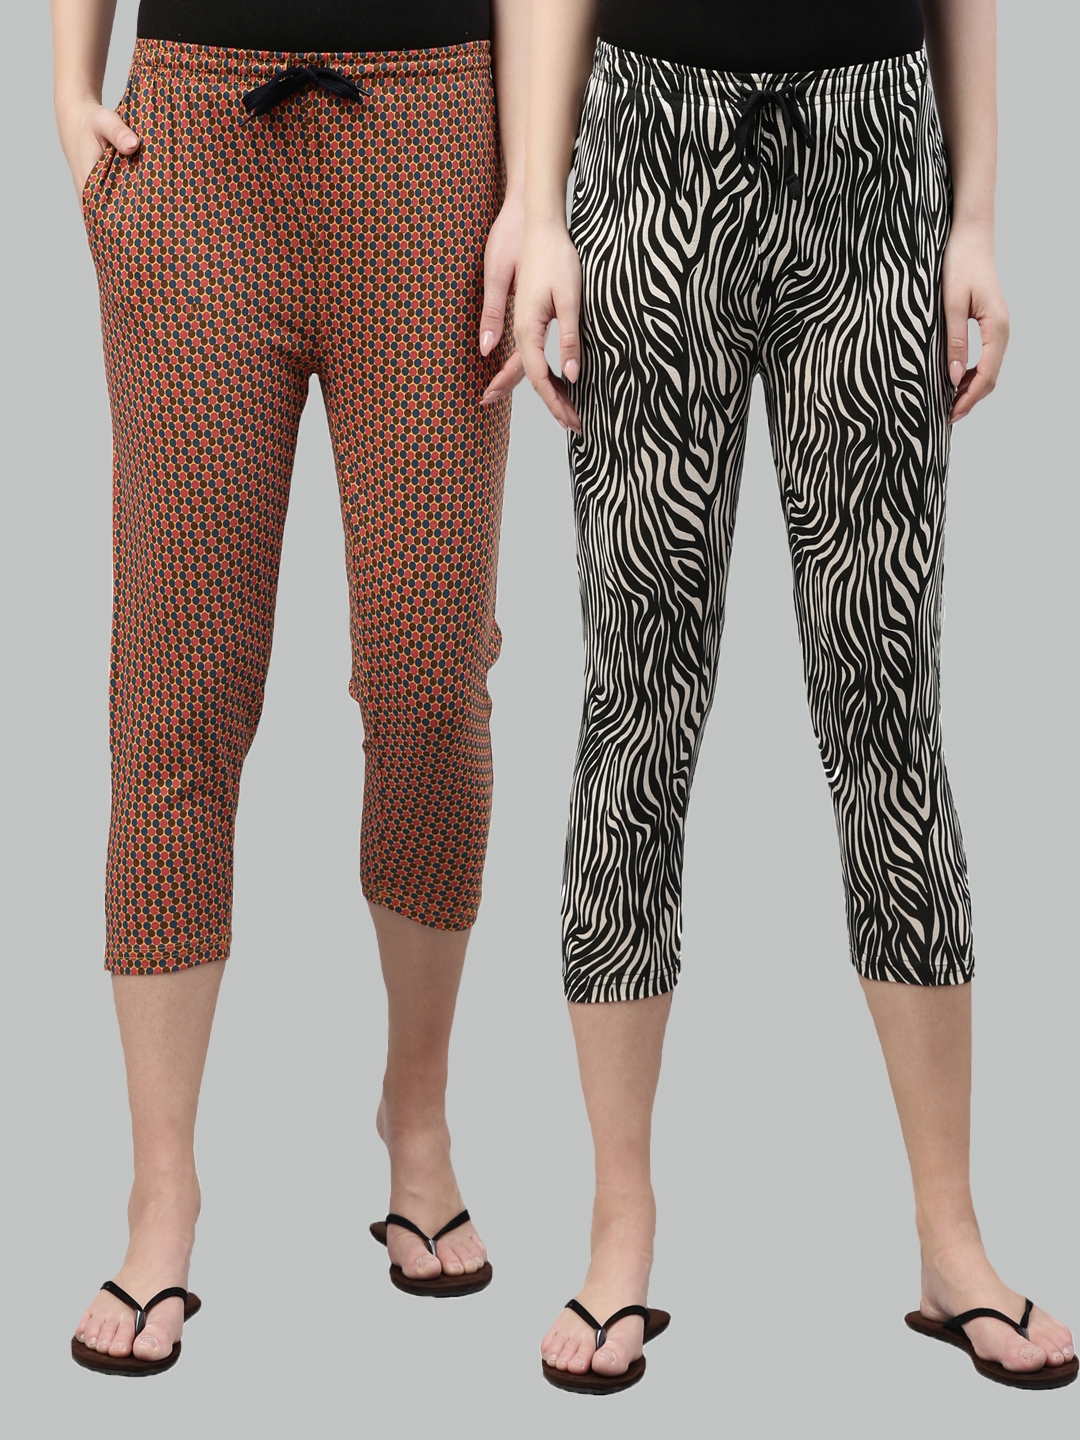 Kryptic Womens 100% Cotton Printed Capris Pack Of 2